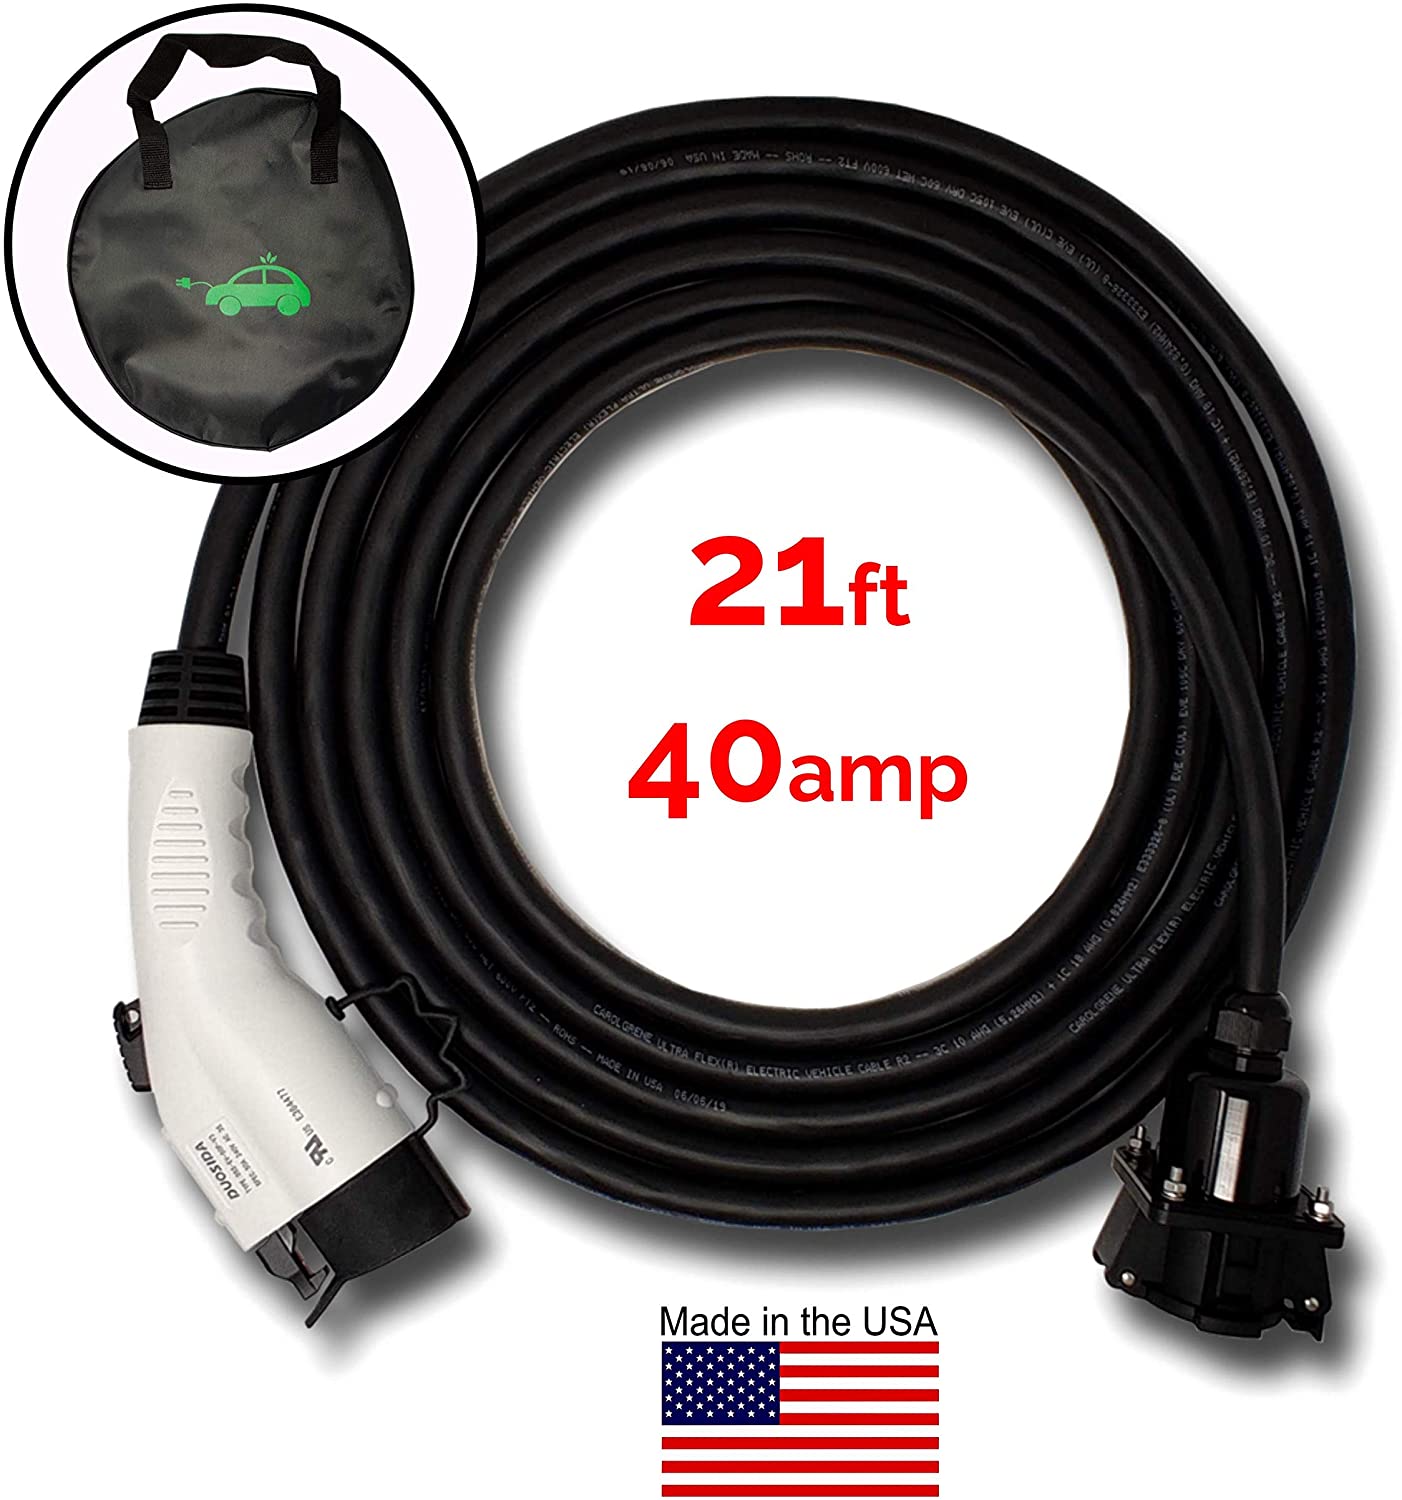 Inteset J-1772 Extension Cord, 40 Amp, 21 Ft - for Electric Vehicle (EV) Charging Stations, Carrying Bag, Ultra-Flex Cable, Made in The USA